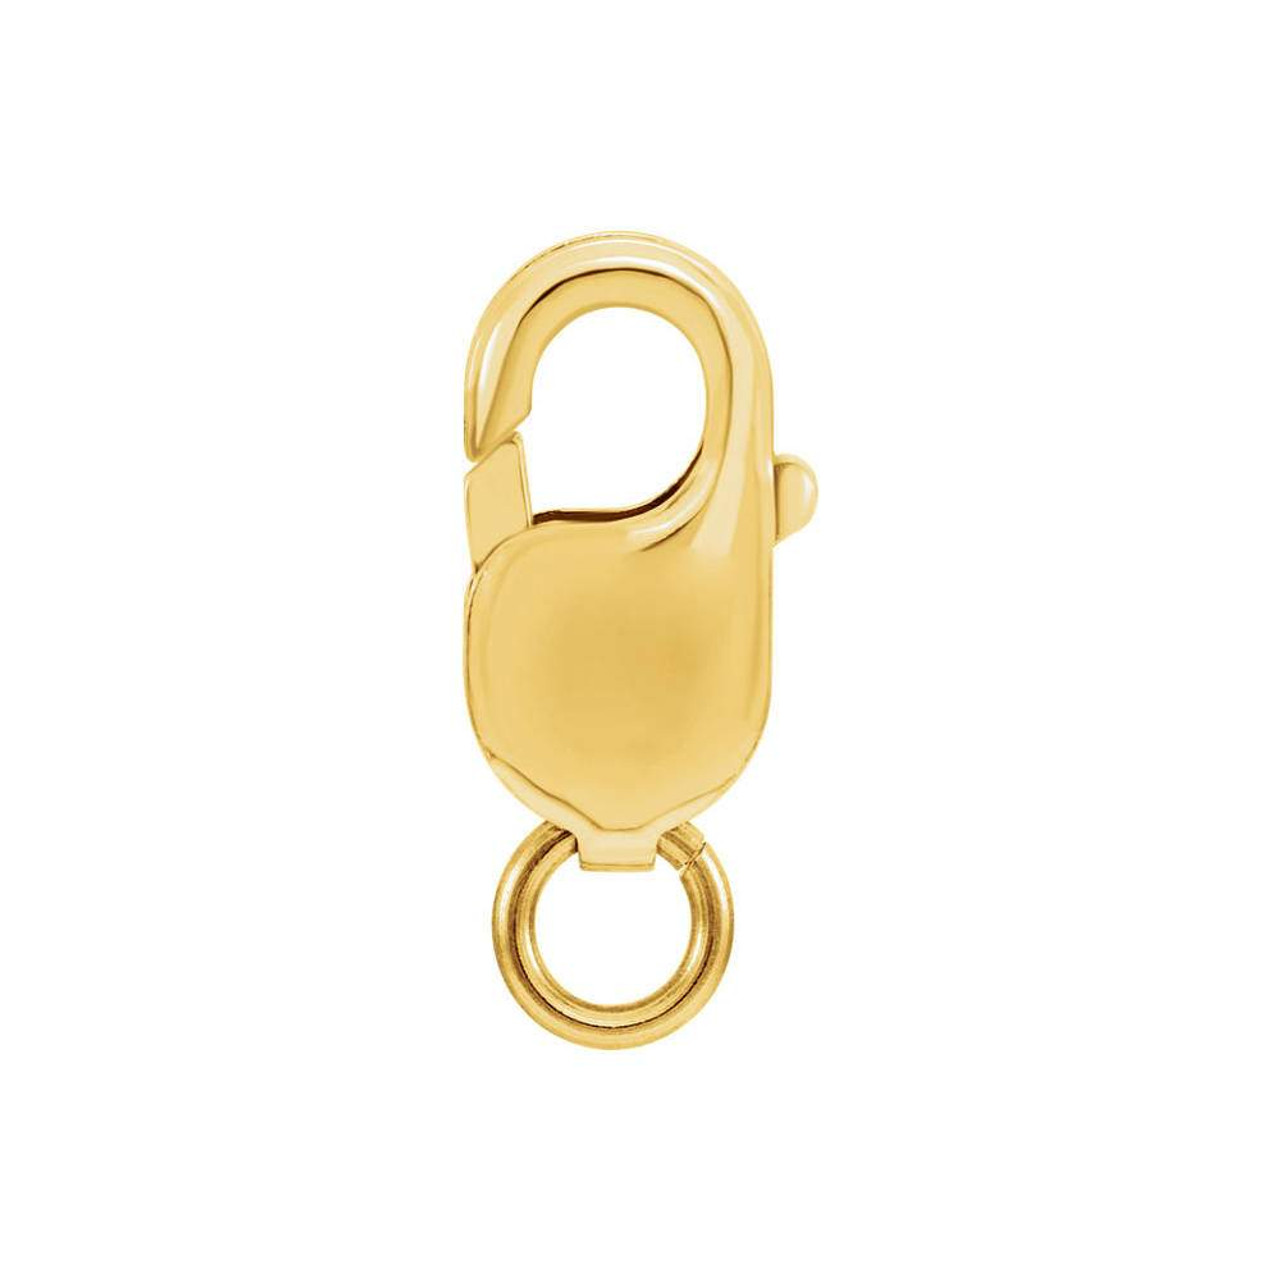 18K Yellow Gold Spring Ring Clasp with Open Ring For Necklace or Bracelet